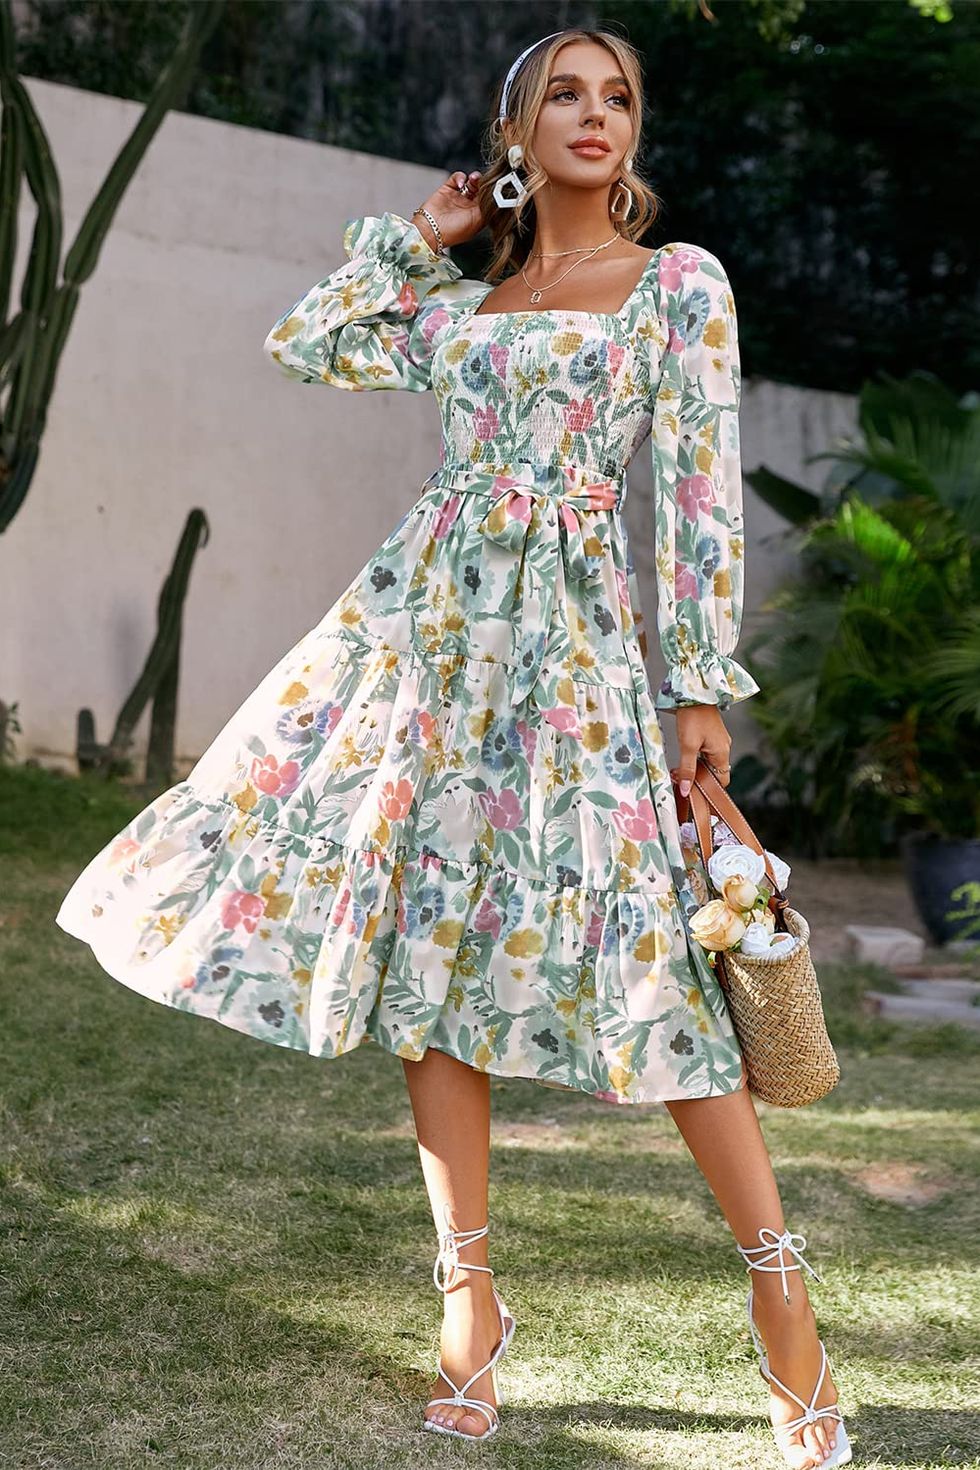 Vintage-Inspired Easter Dresses for Women - Retro Housewife Goes Green